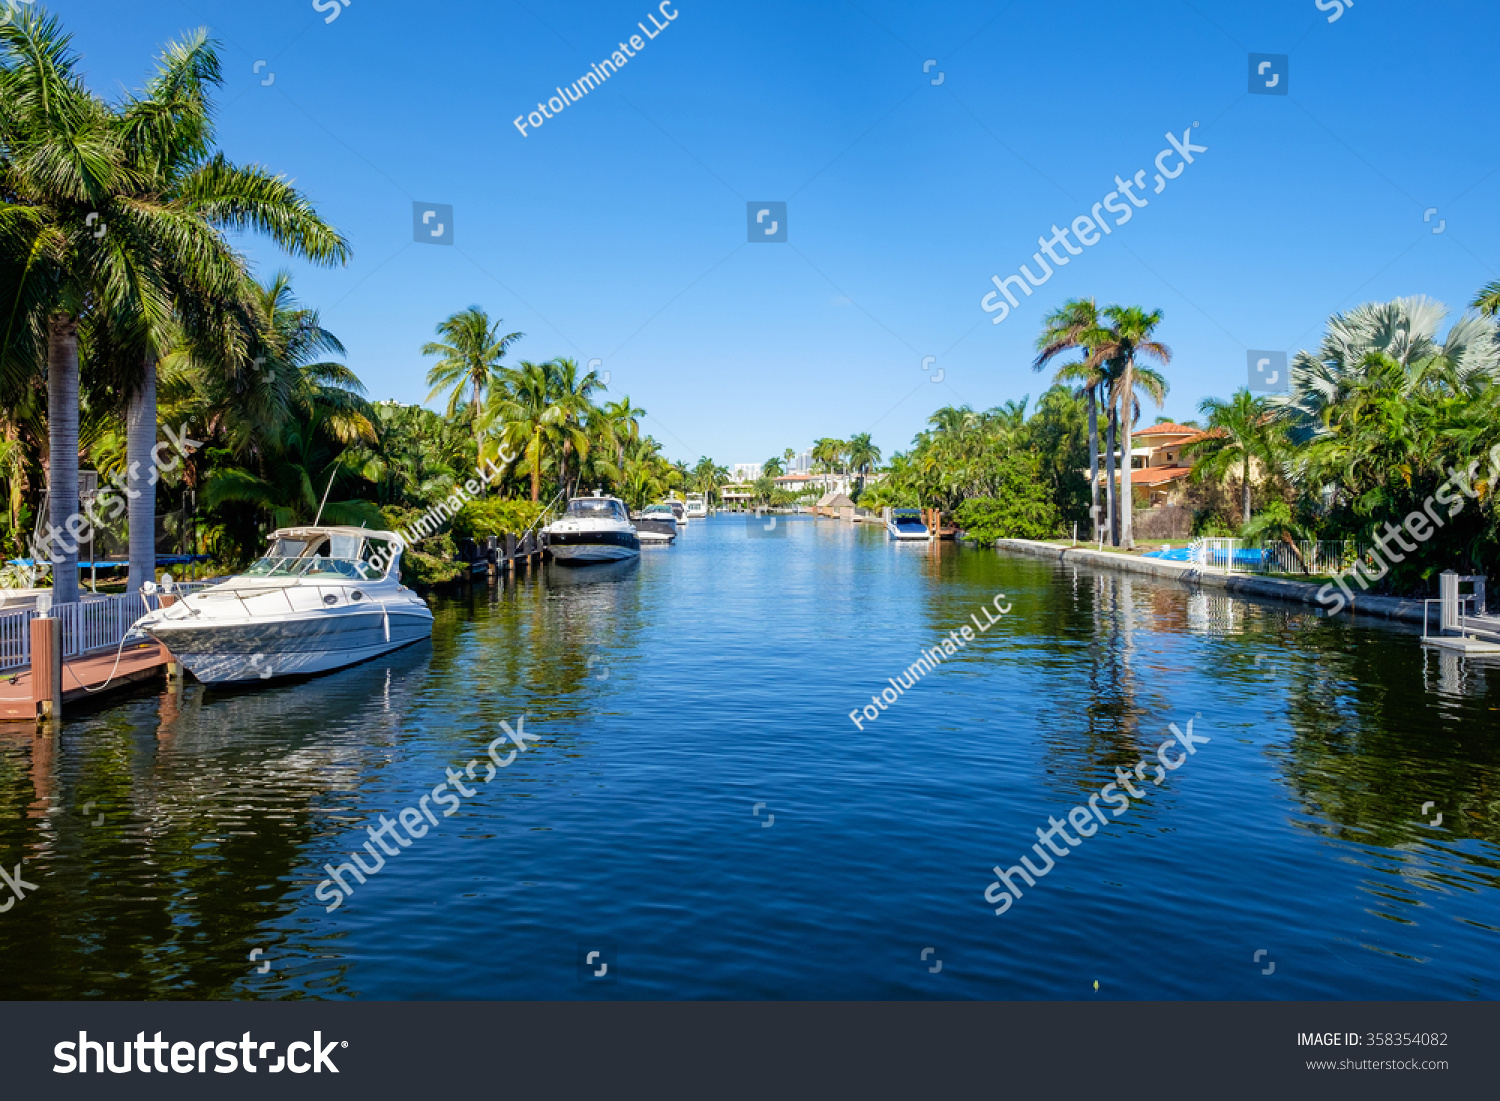 Typical waterfront community in South Florida. #358354082